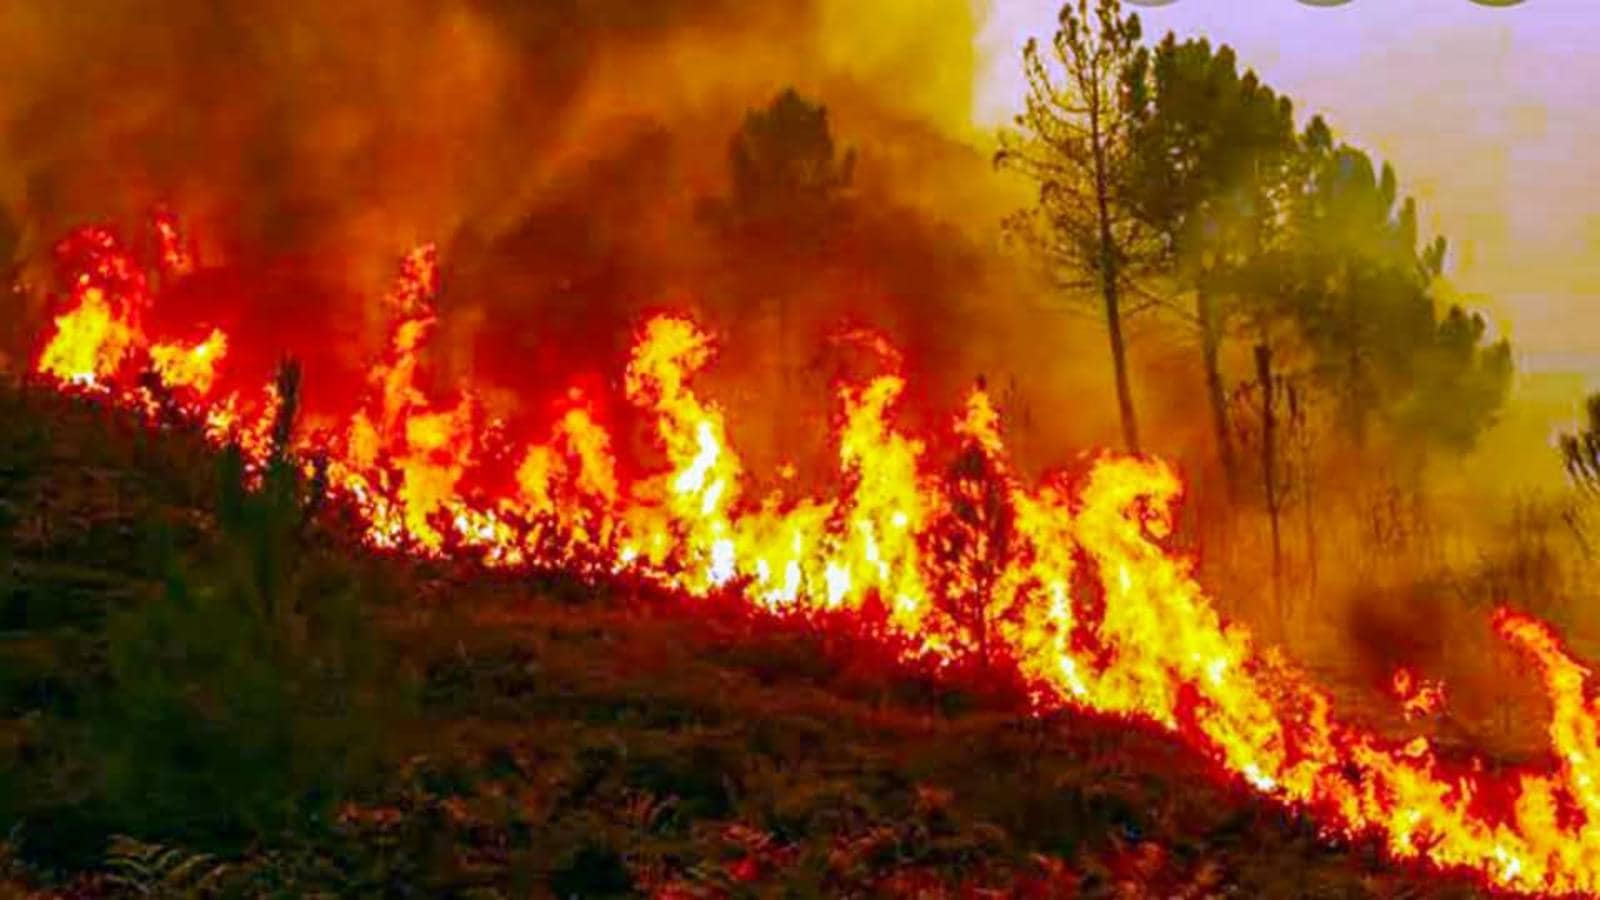 The forest fires in Uttarakhand | HT Editorial - Hindustan Times